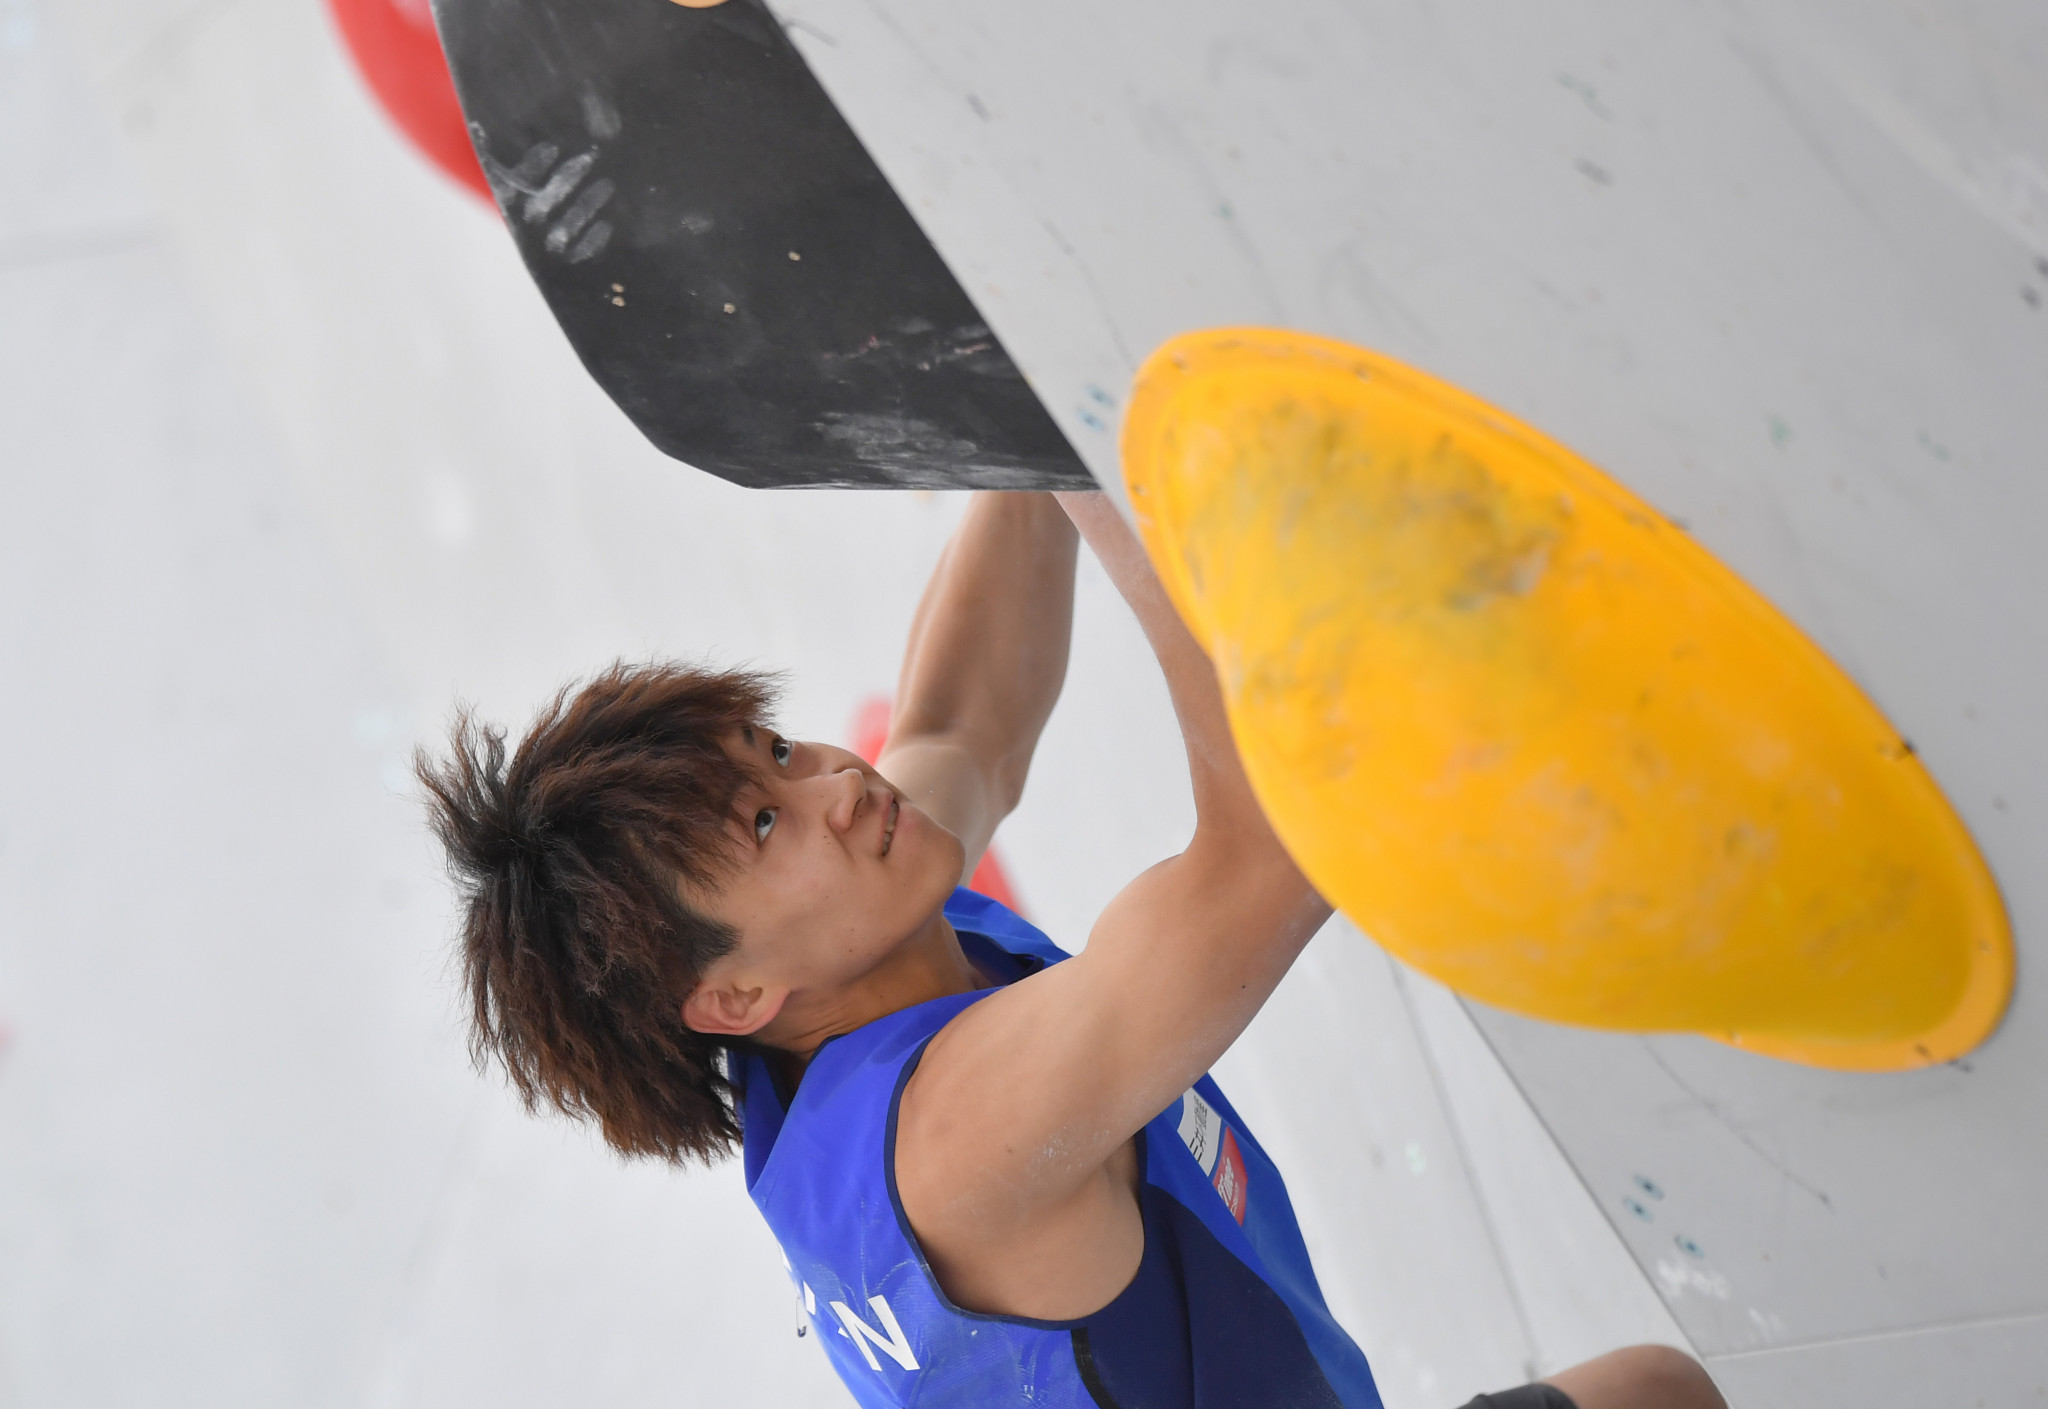 World Cup champion Yoshiyuki Ogata of Japan topped the standings in the second group ©Getty Images